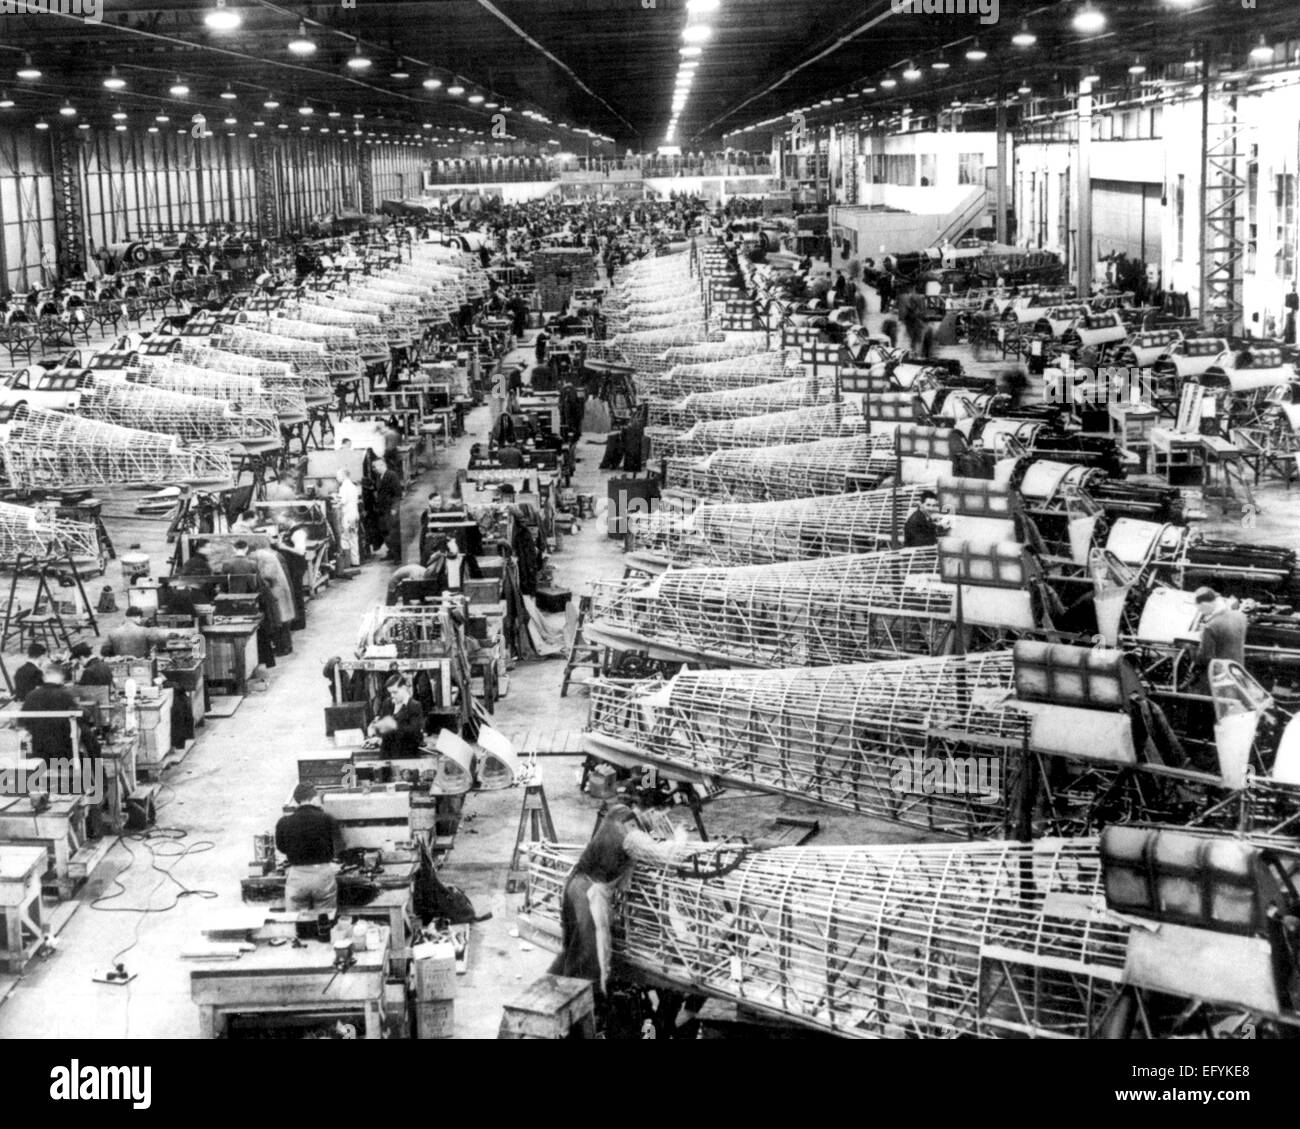 HURRICANE AIRCRAFT assembly factory at Brooklands, Weybridge about 1940 Stock Photo